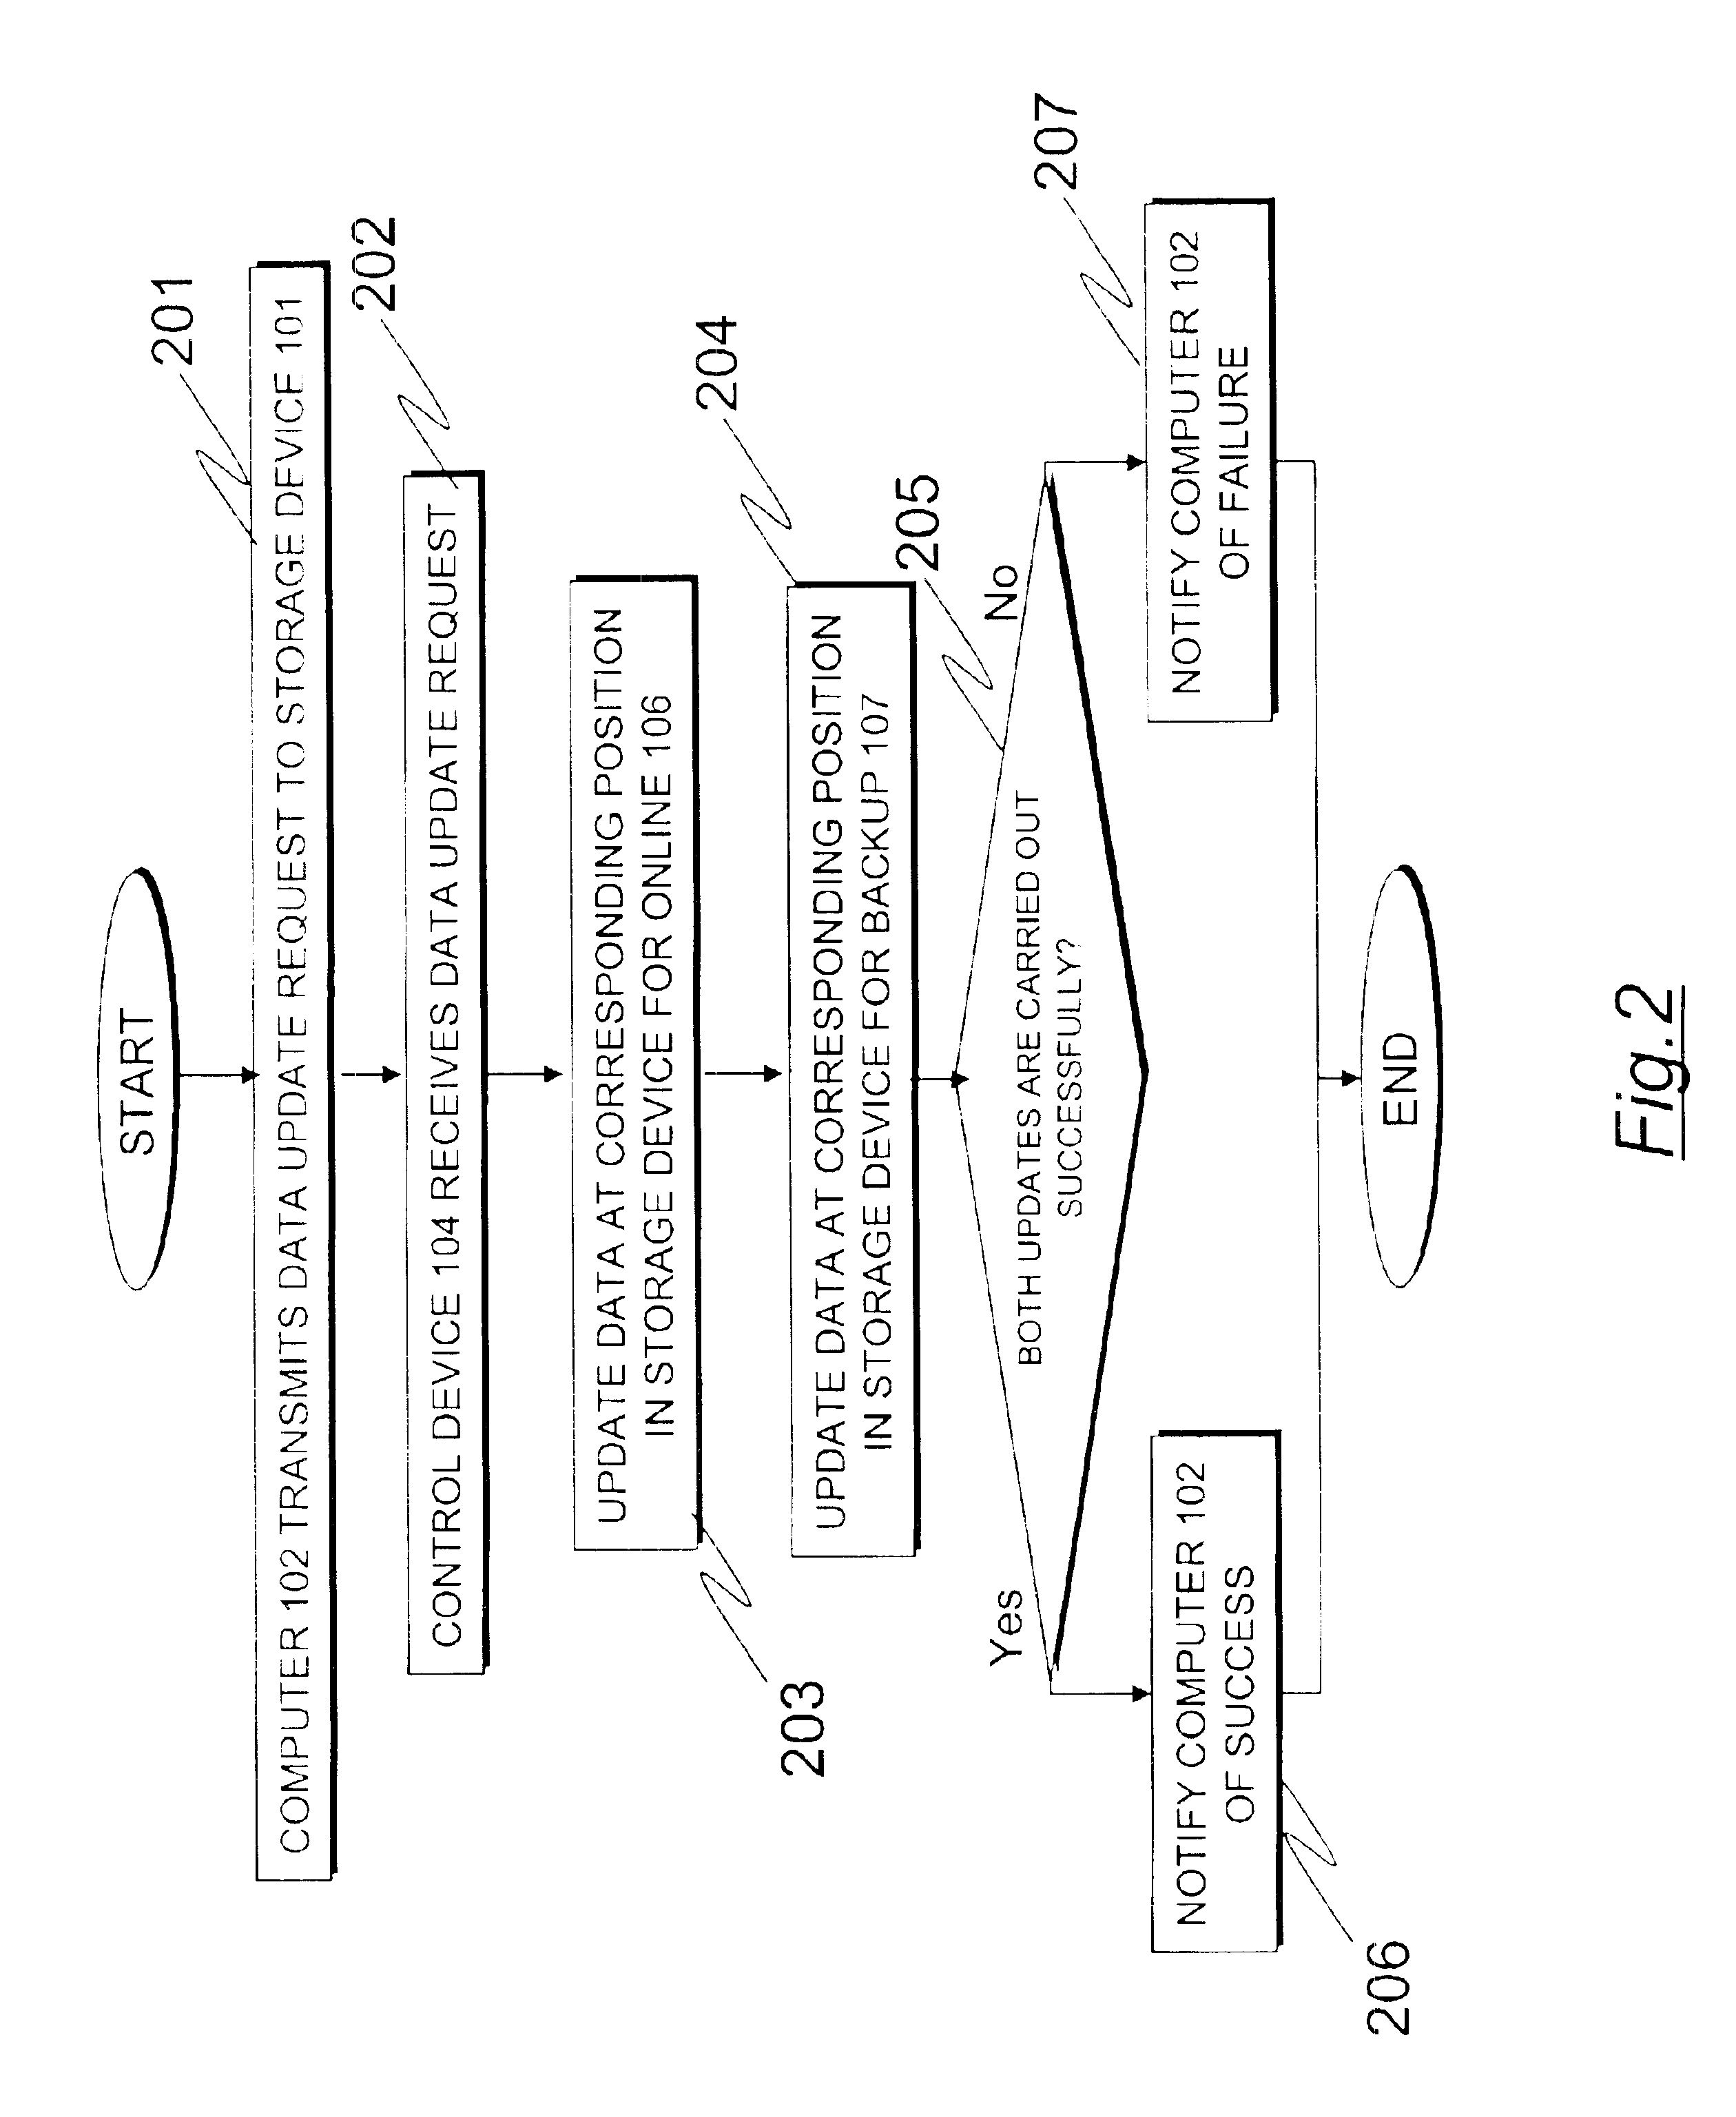 Storage device, backup and fault tolerant redundant method and computer program code of plurality storage devices